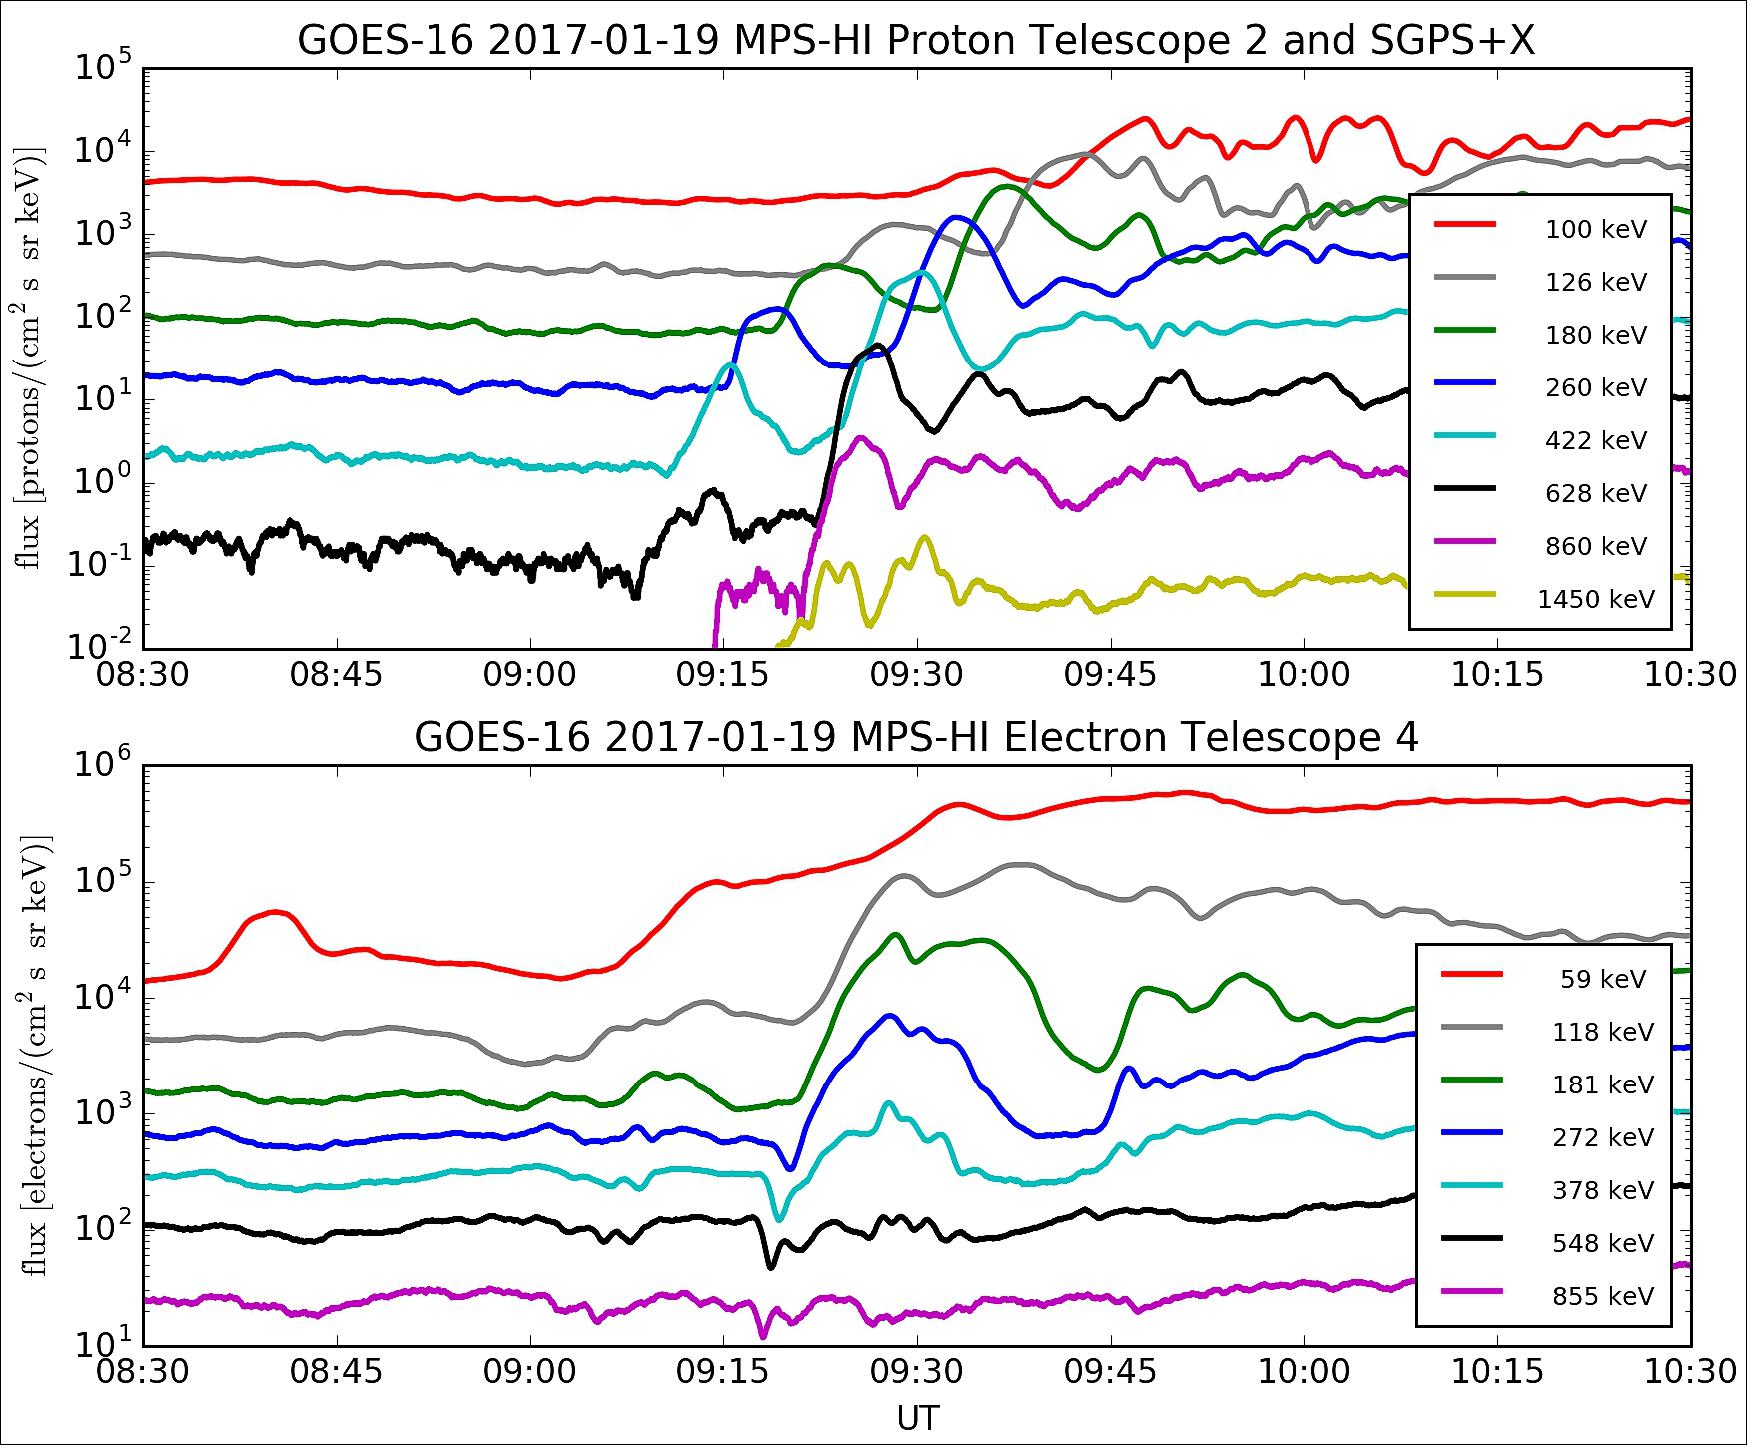 Figure 20: This plot of SEISS data shows injections of protons and electrons observed by the MPS-HI (Magnetospheric Particle Sensors-HI) and SGPS (Solar and Galactic Proton Sensor) on January 19, 2017. MPS-HI and SGPS are two of the individual sensor units on SEISS. The fluxes shown are from the MPS-HI telescopes that look radially outward from the Earth, and from the lowest-energy channel observed by the eastward-looking SGPS (image credit: NOAA, NASA)